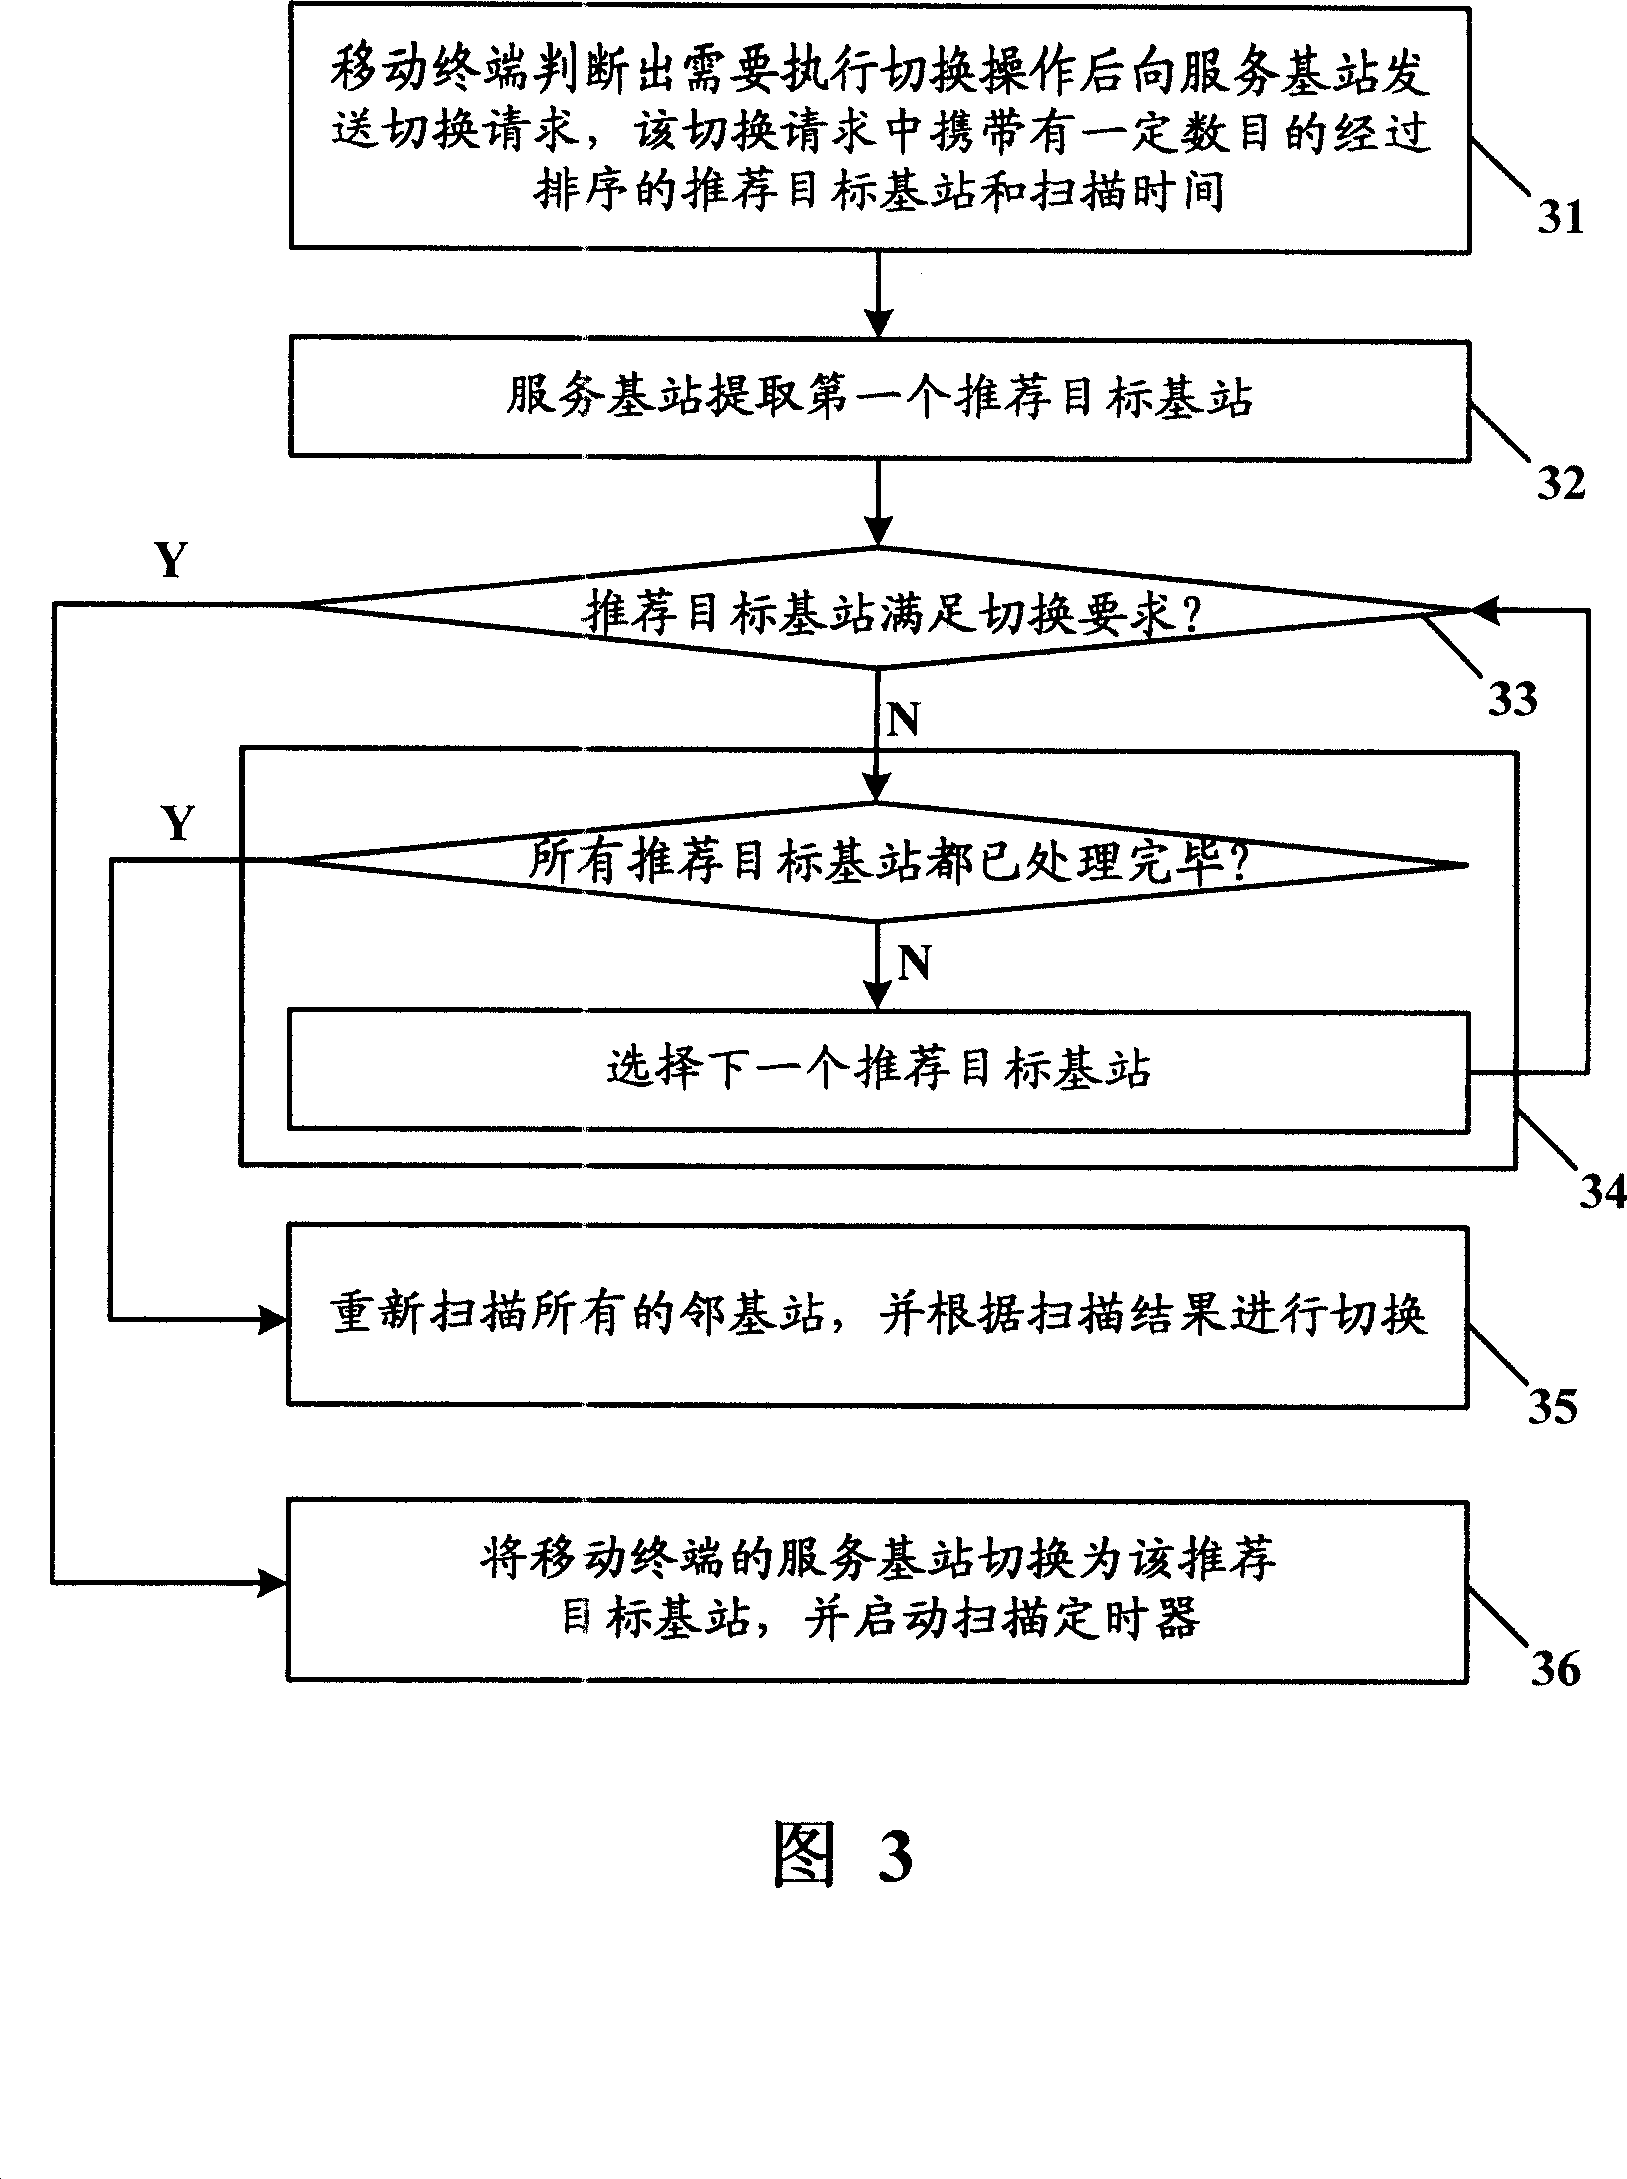 Method for selecting scanning and association base station in Wimax system and base station switching method